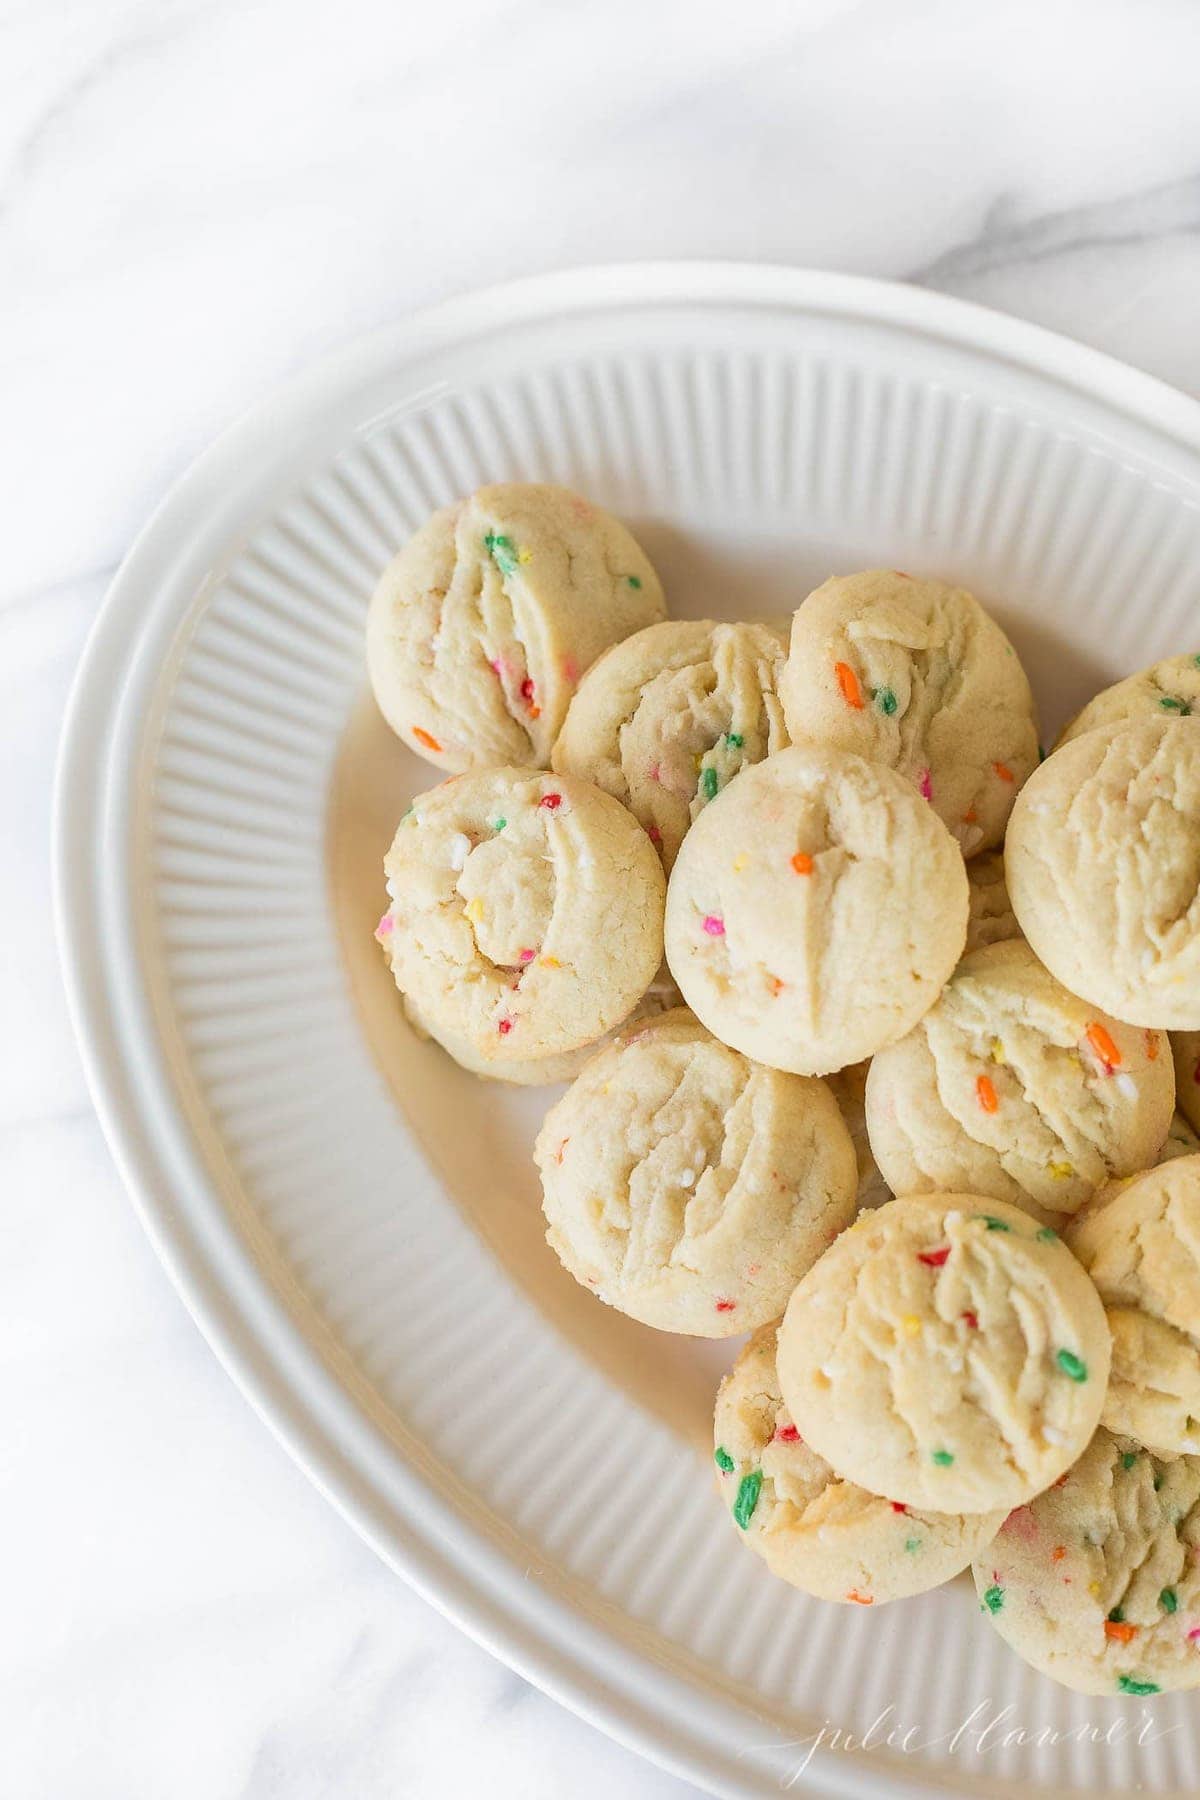 funfetti cookies baked and ready to eat